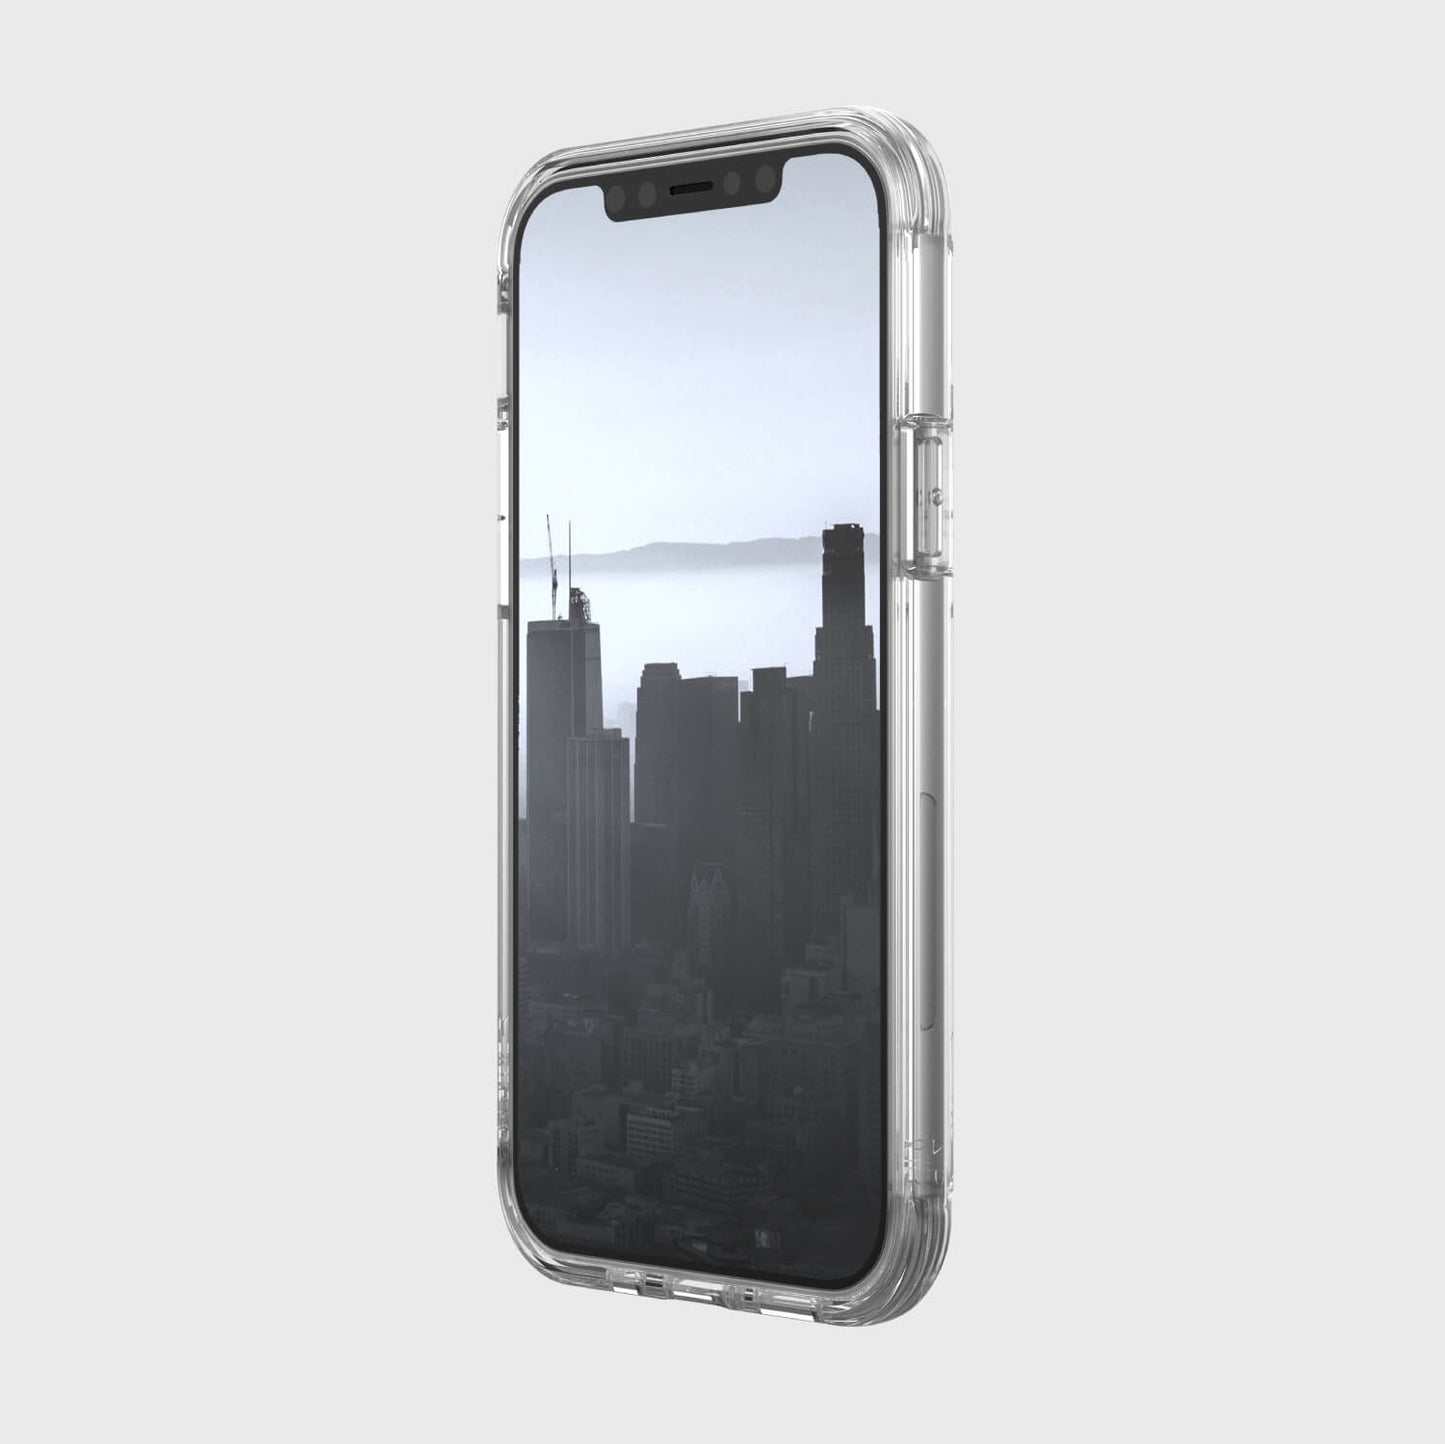 An Raptic Air iPhone 12 & iPhone 12 Pro Case offering 13-foot drop protection with a view of the city.